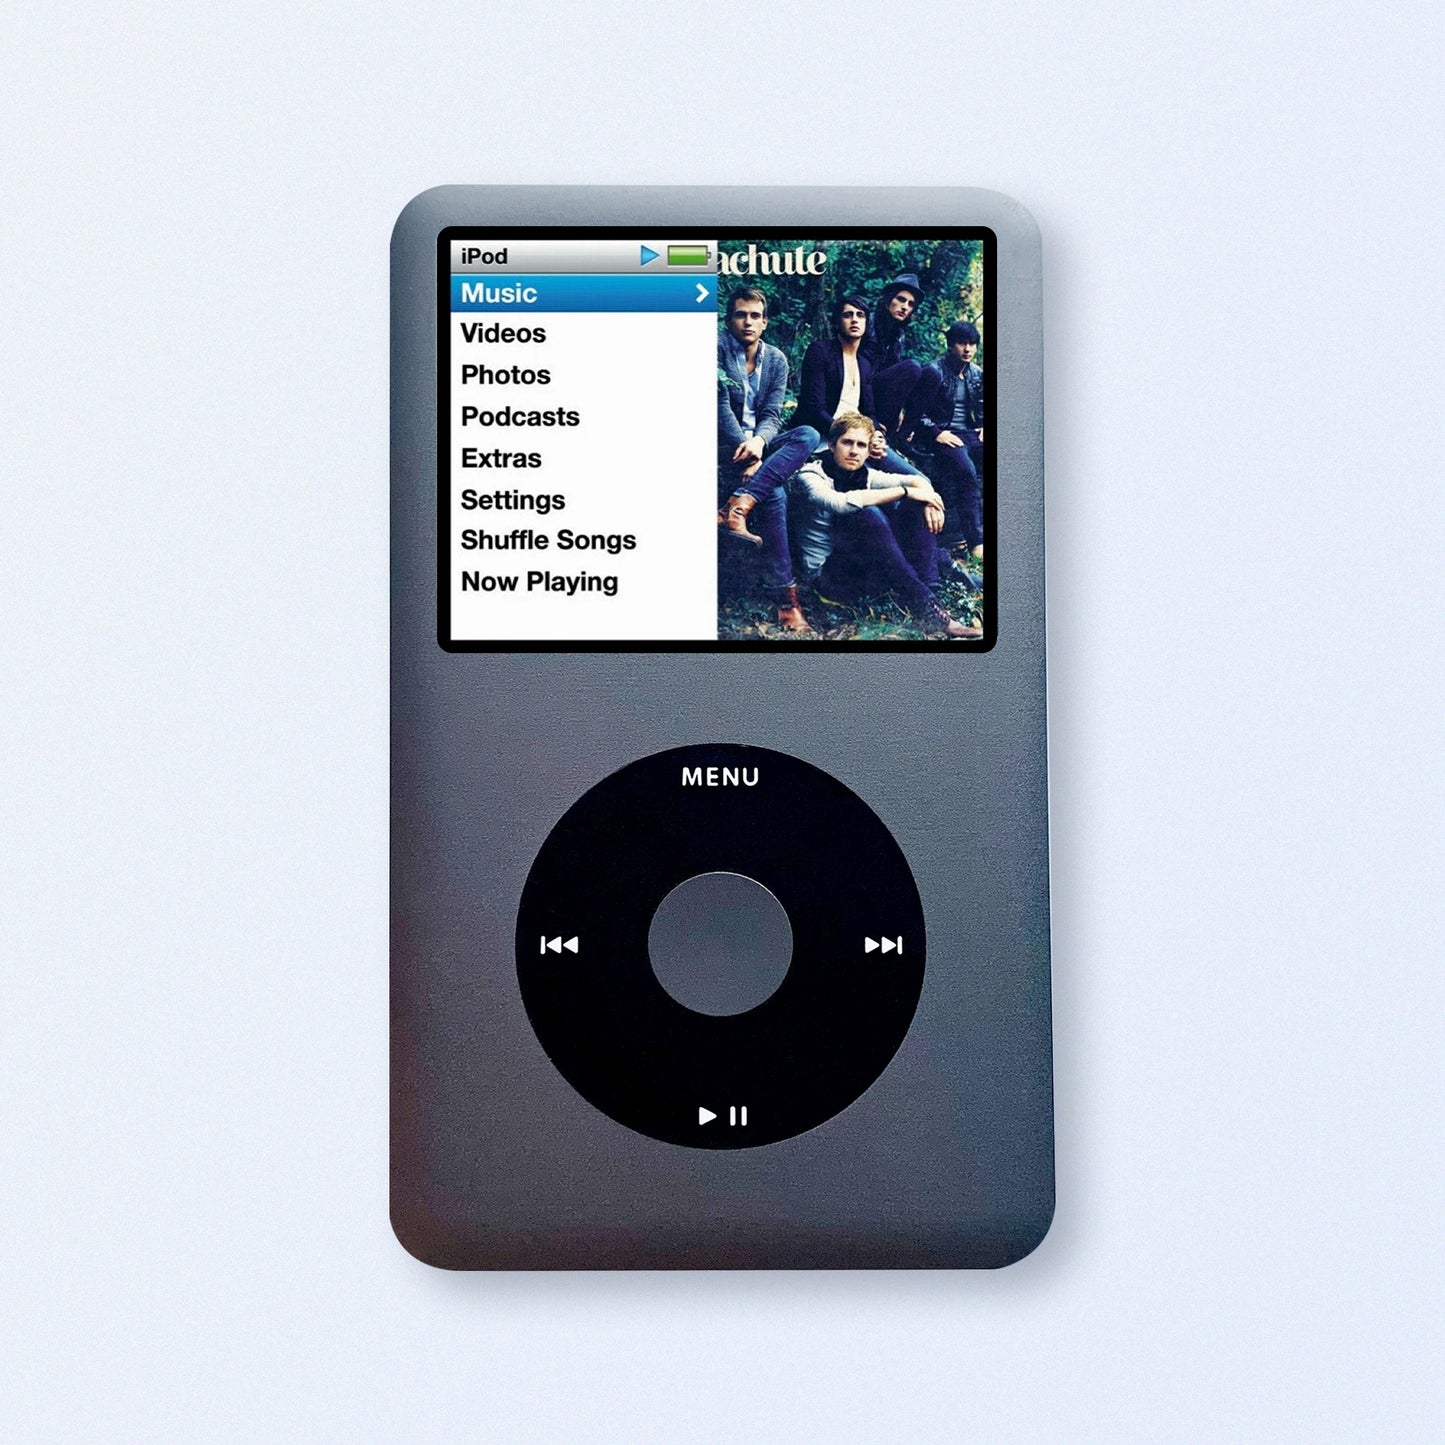 Space Gray iPod Classic 7th Gen upgraded SDXC Personalised Media Player